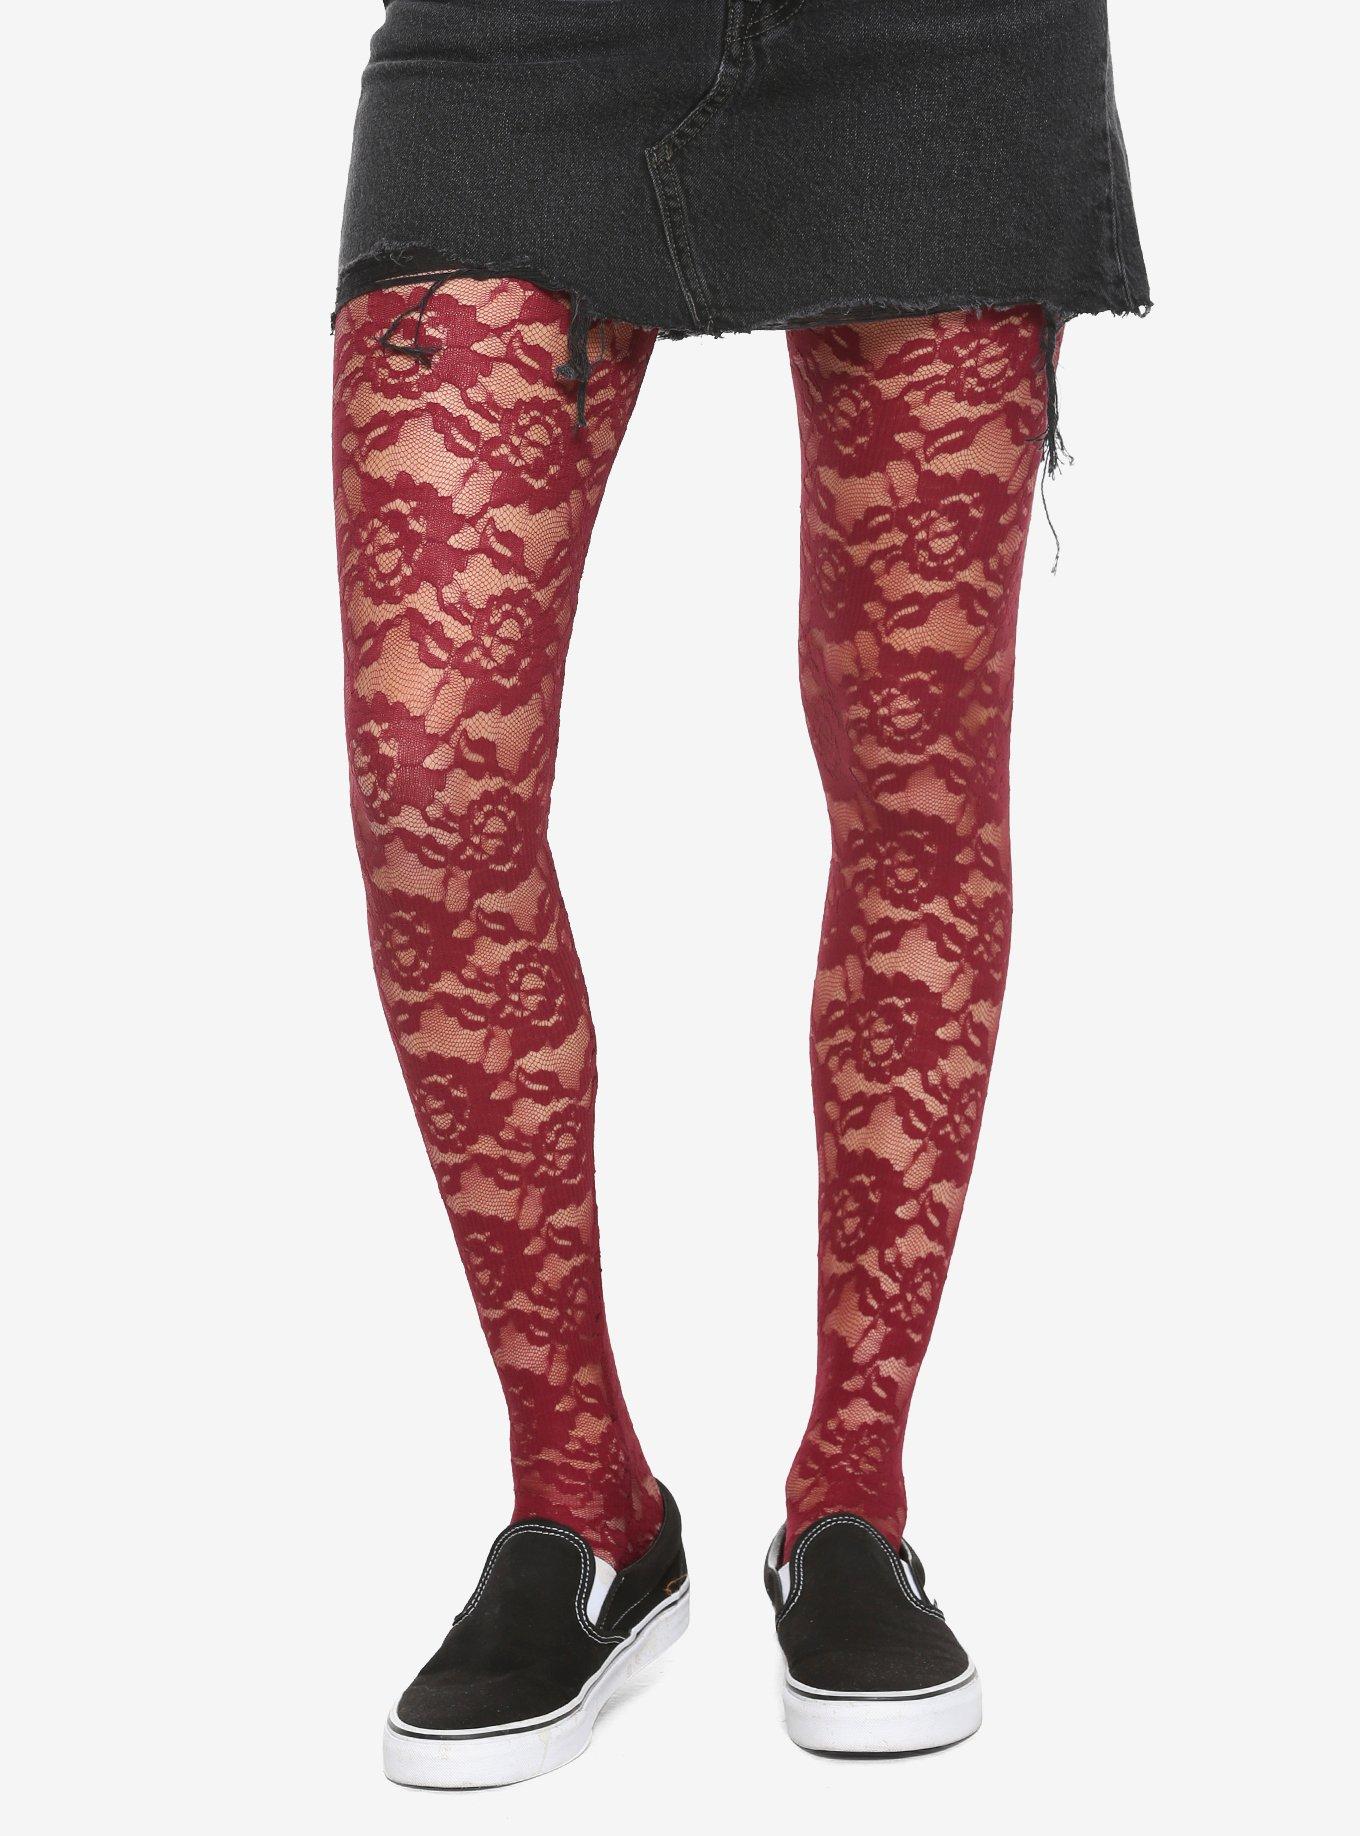 Maroon Lace Roses Tights